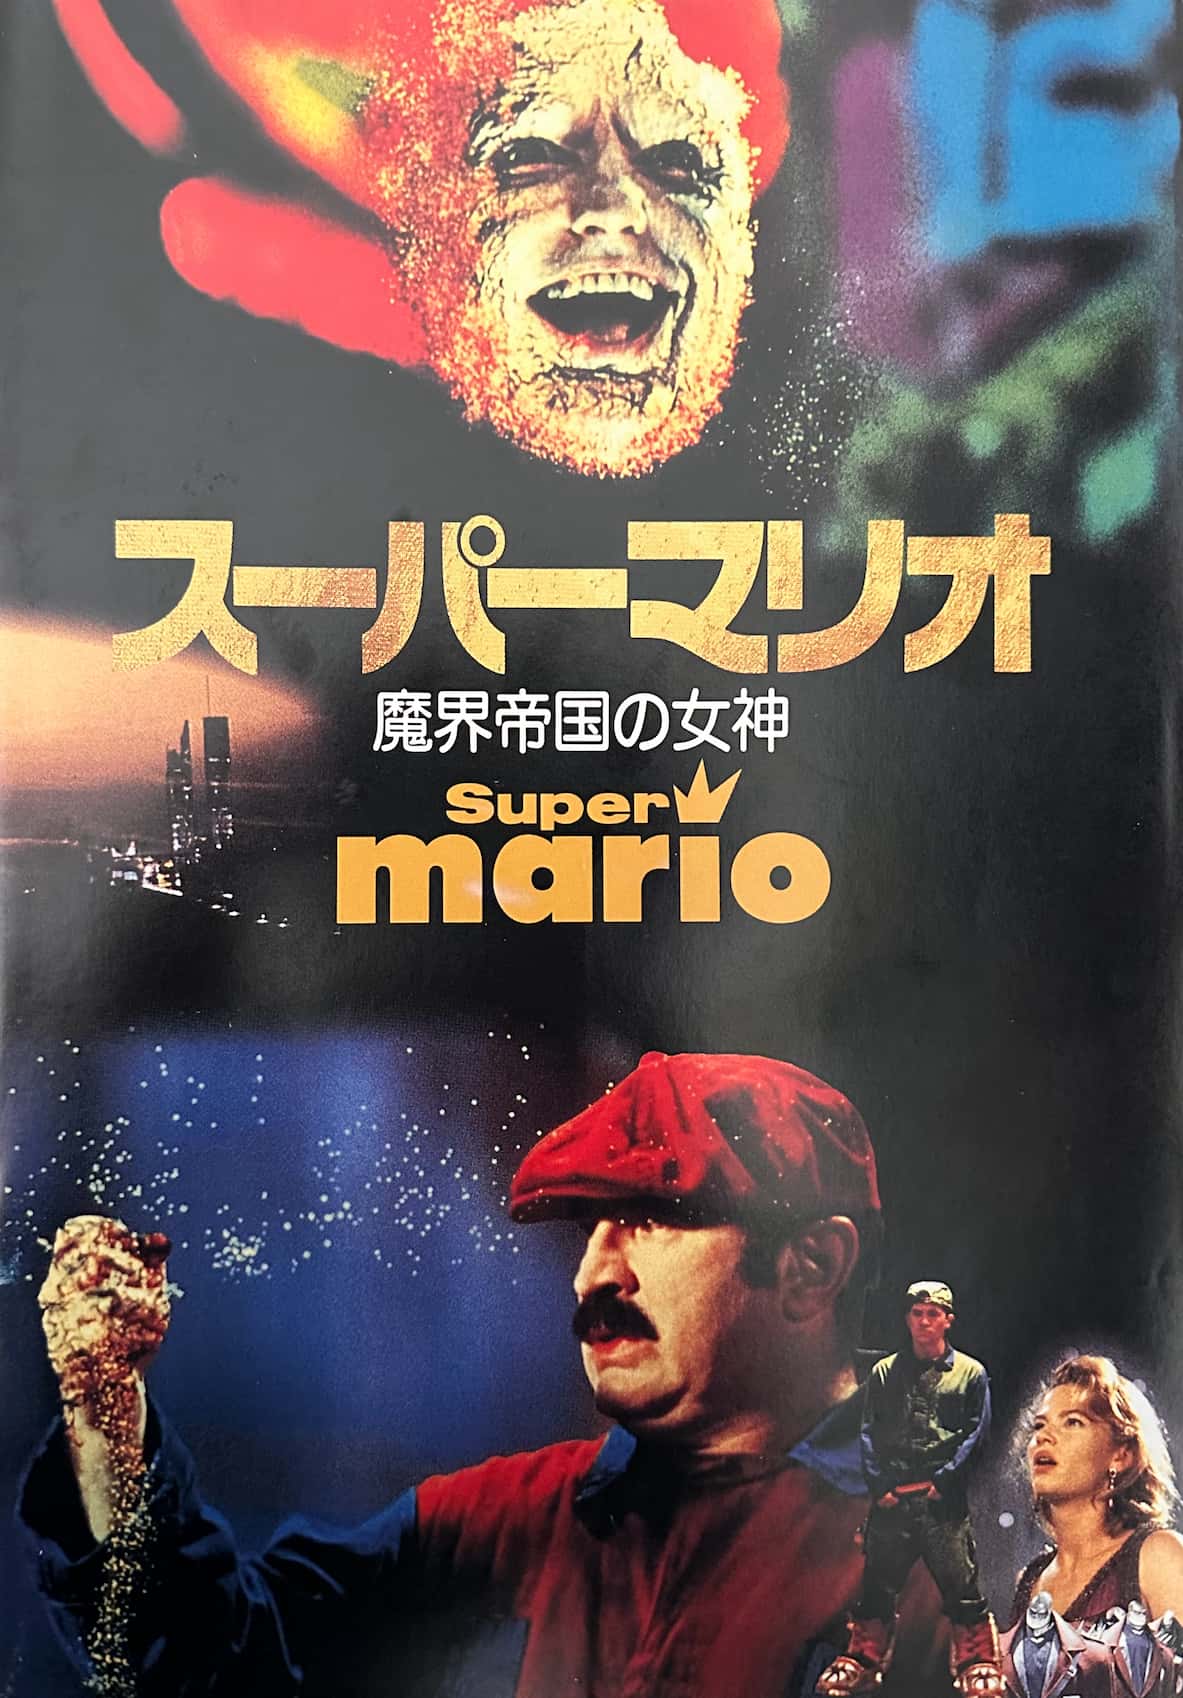 Super Mario Bros. 1993 Japanese theatrical pamphlet cover.